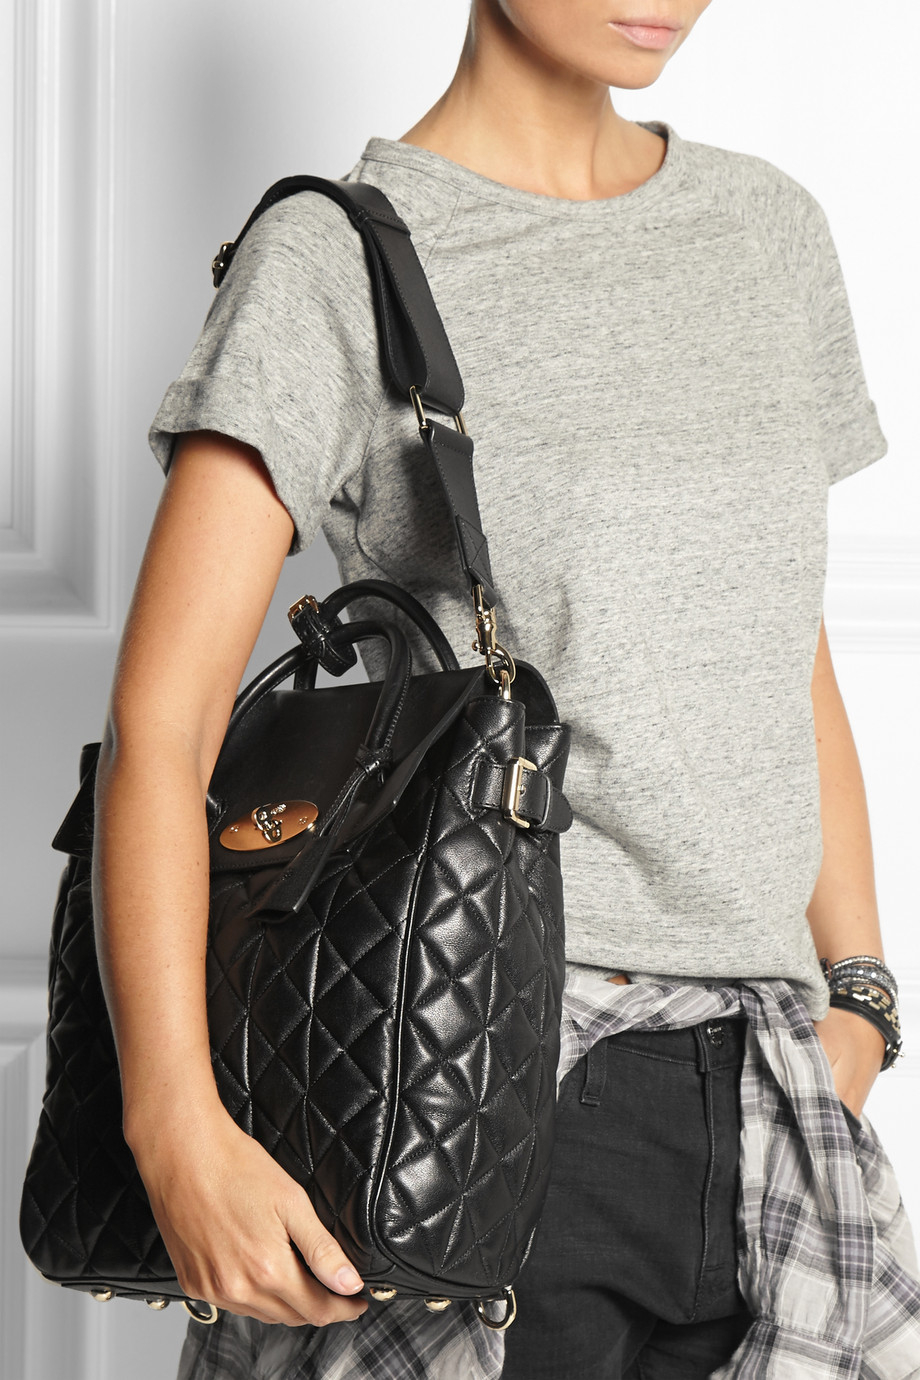 Lyst - Mulberry Cara Delevingne Large Quilted Leather Backpack in Black